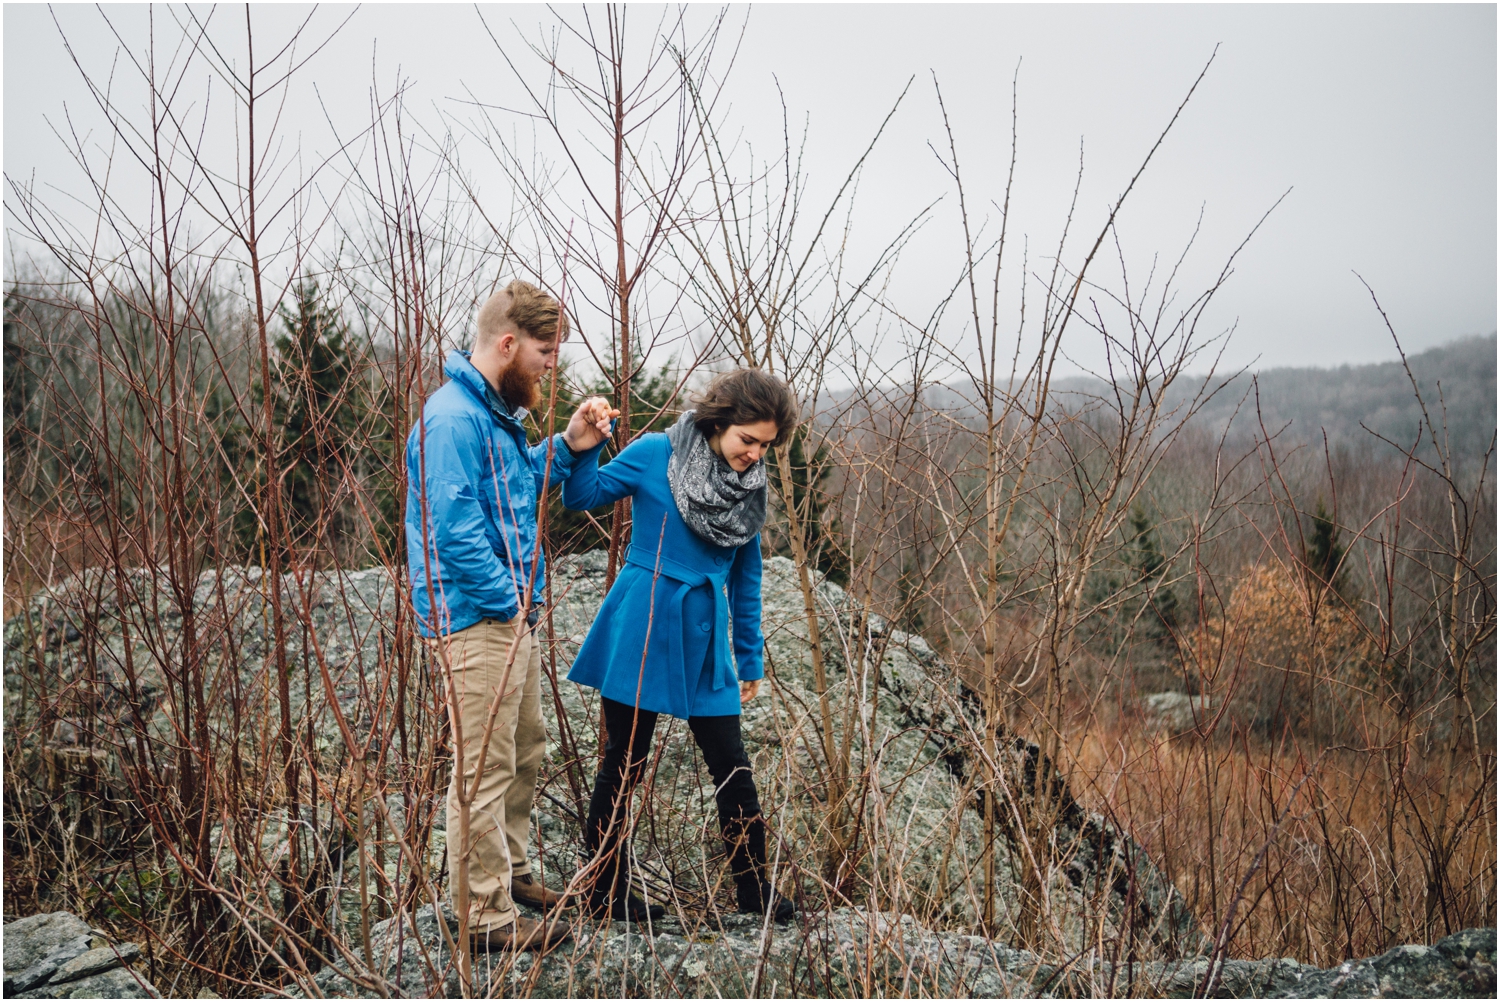 katy-sergent-photography-grayson-highlands-engagement-session-mouth-of-wilson-virginia-damascus-appalachian-trail-tennessee-wedding-elopement_0019.jpg